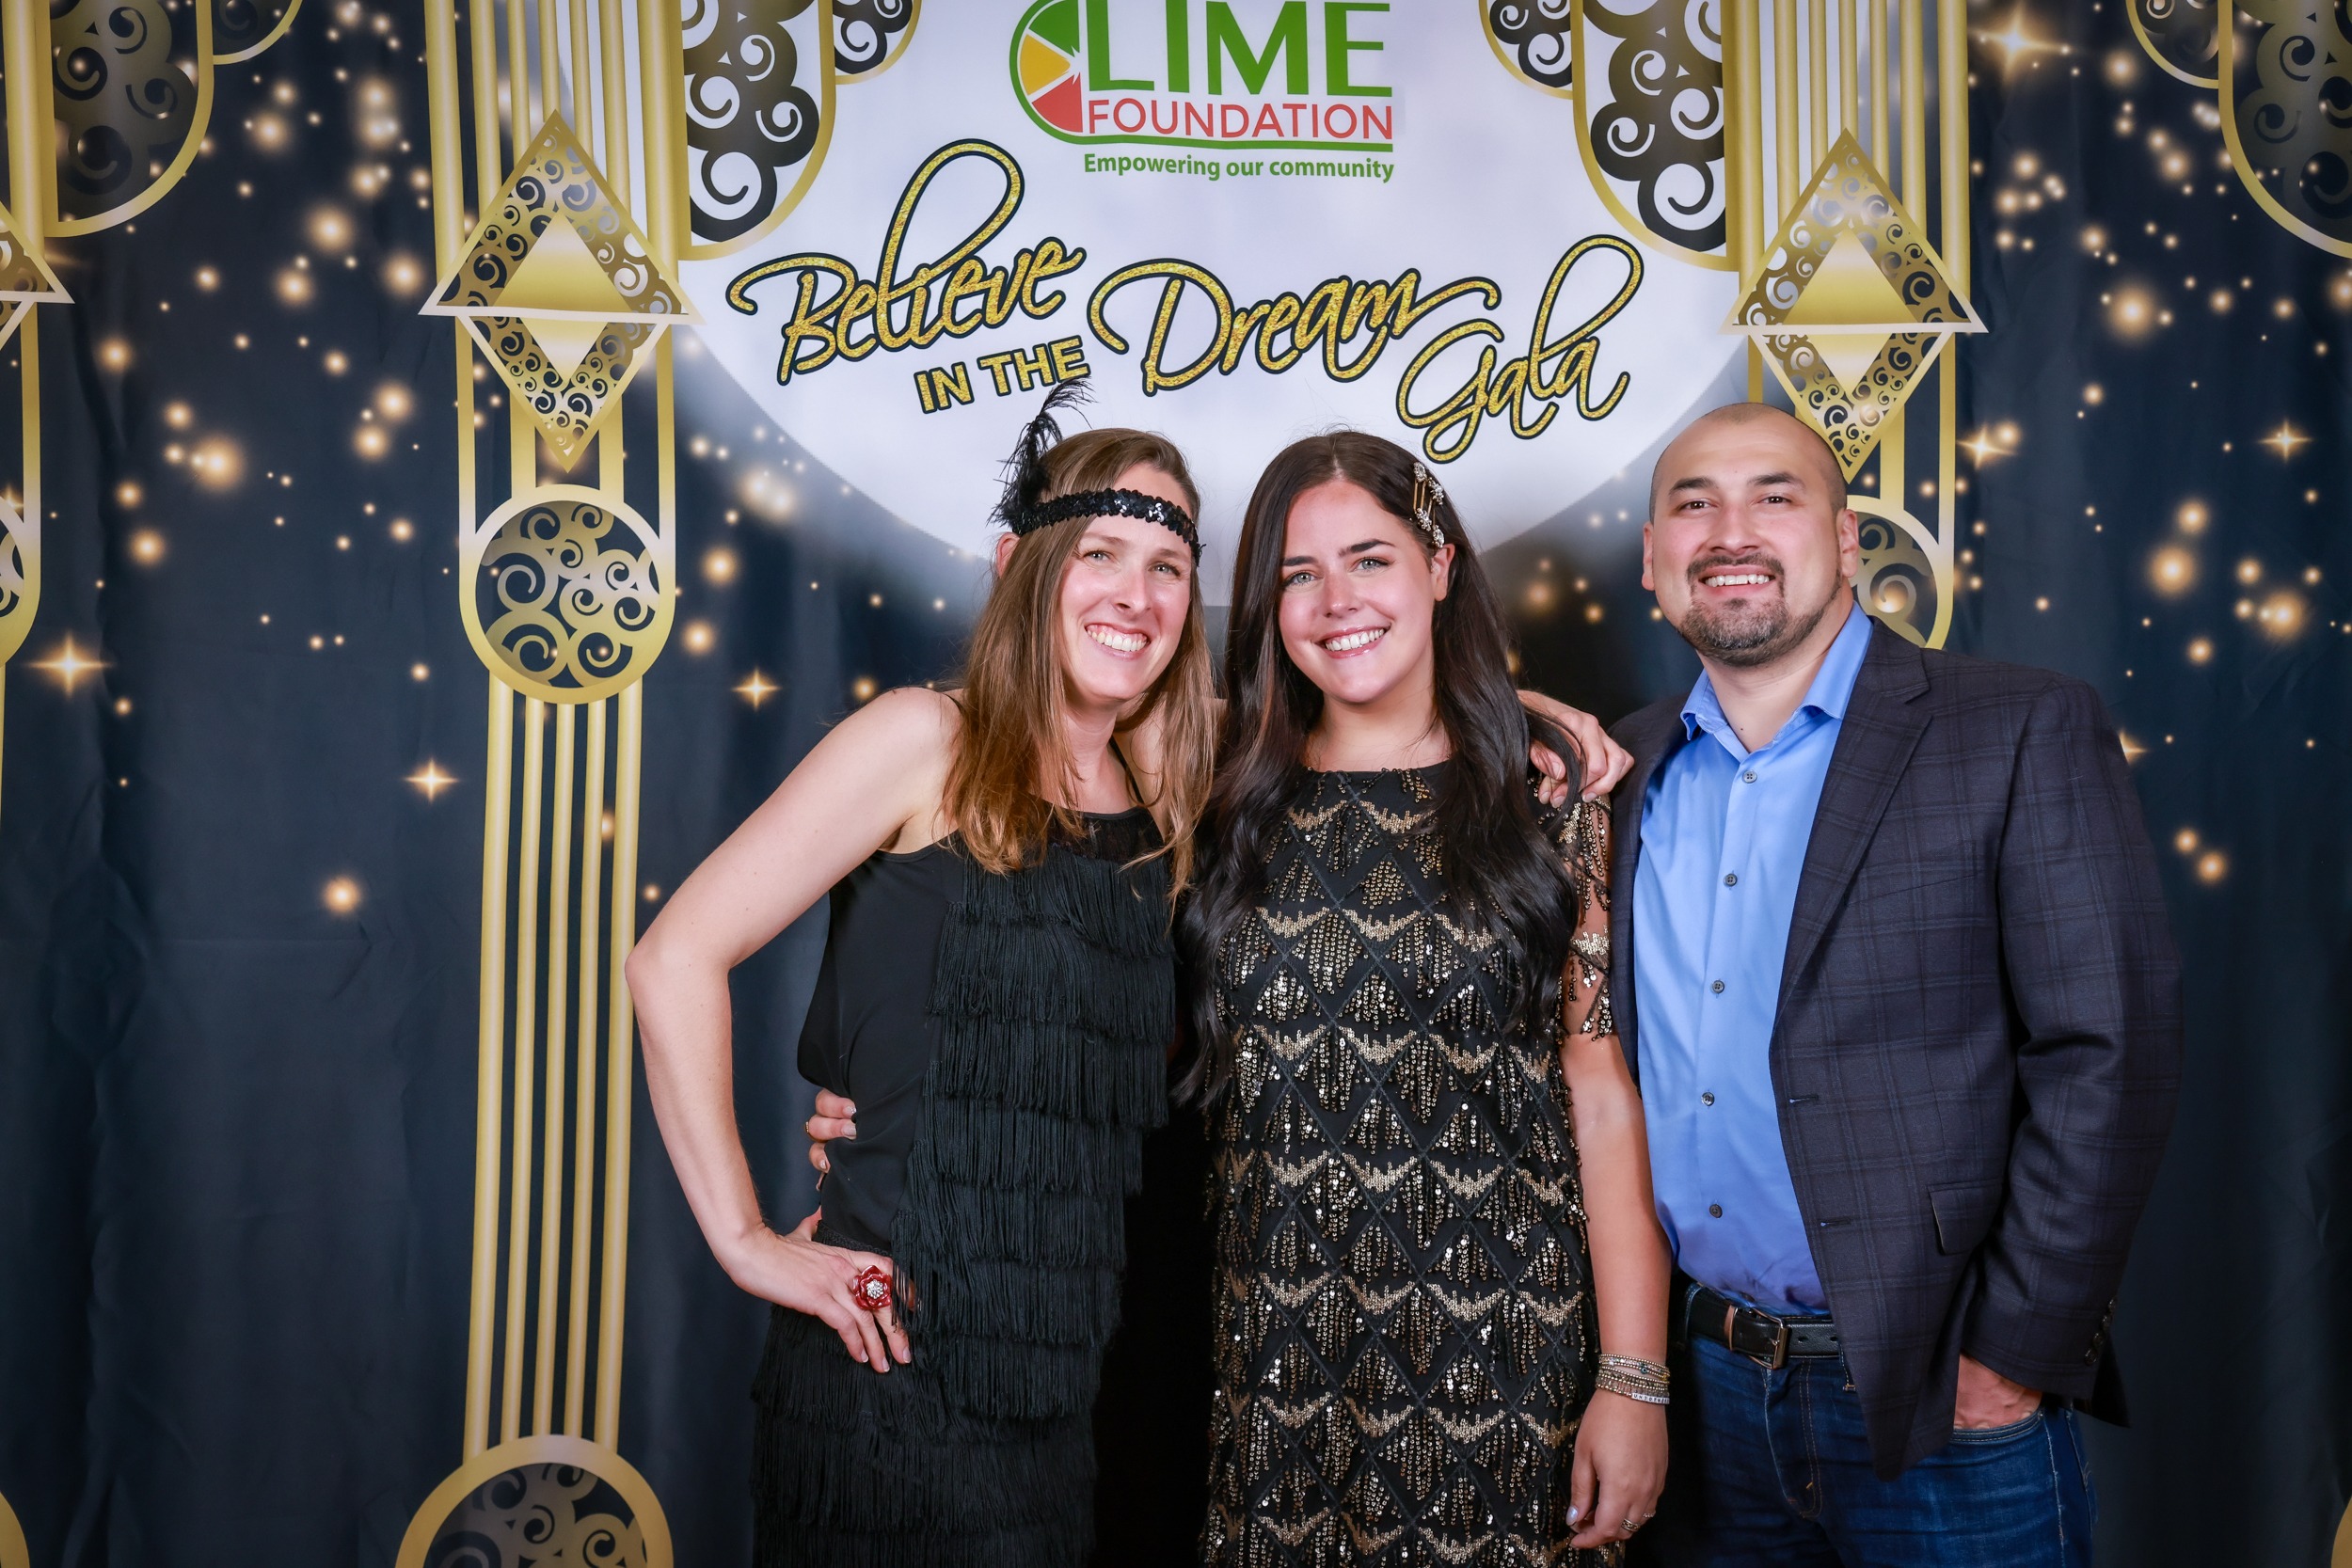 Three individuals posing for a photo in front of a gilded backdrop at The LIME Foundation of Santa Rosa.